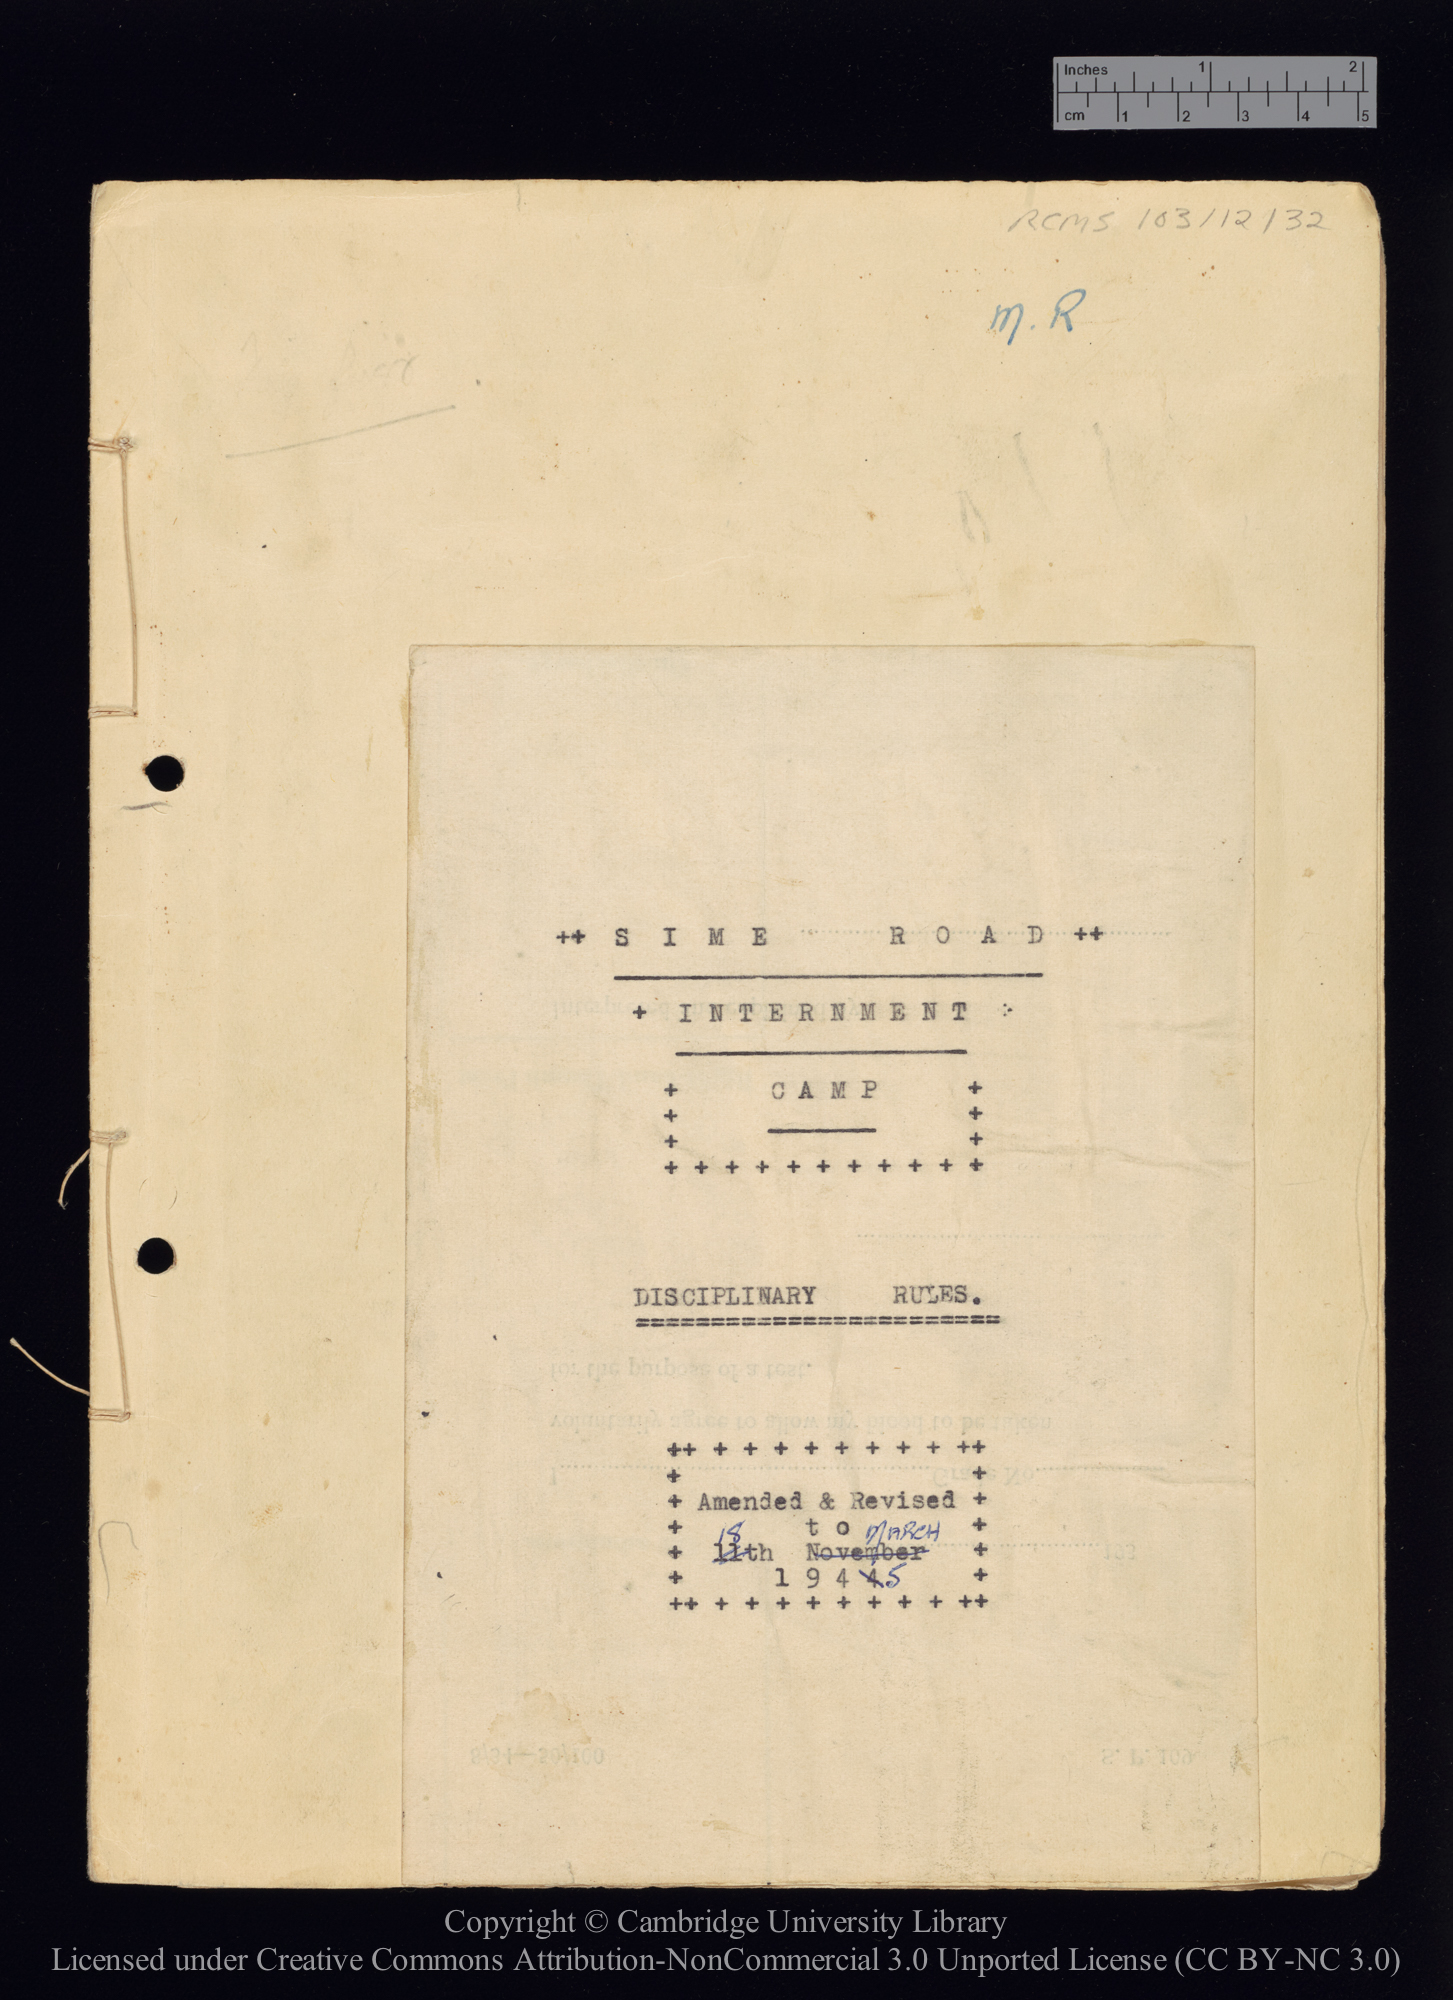 Sime Road internment camp disciplinary rules, amended and revised to 18 Mar. 1945